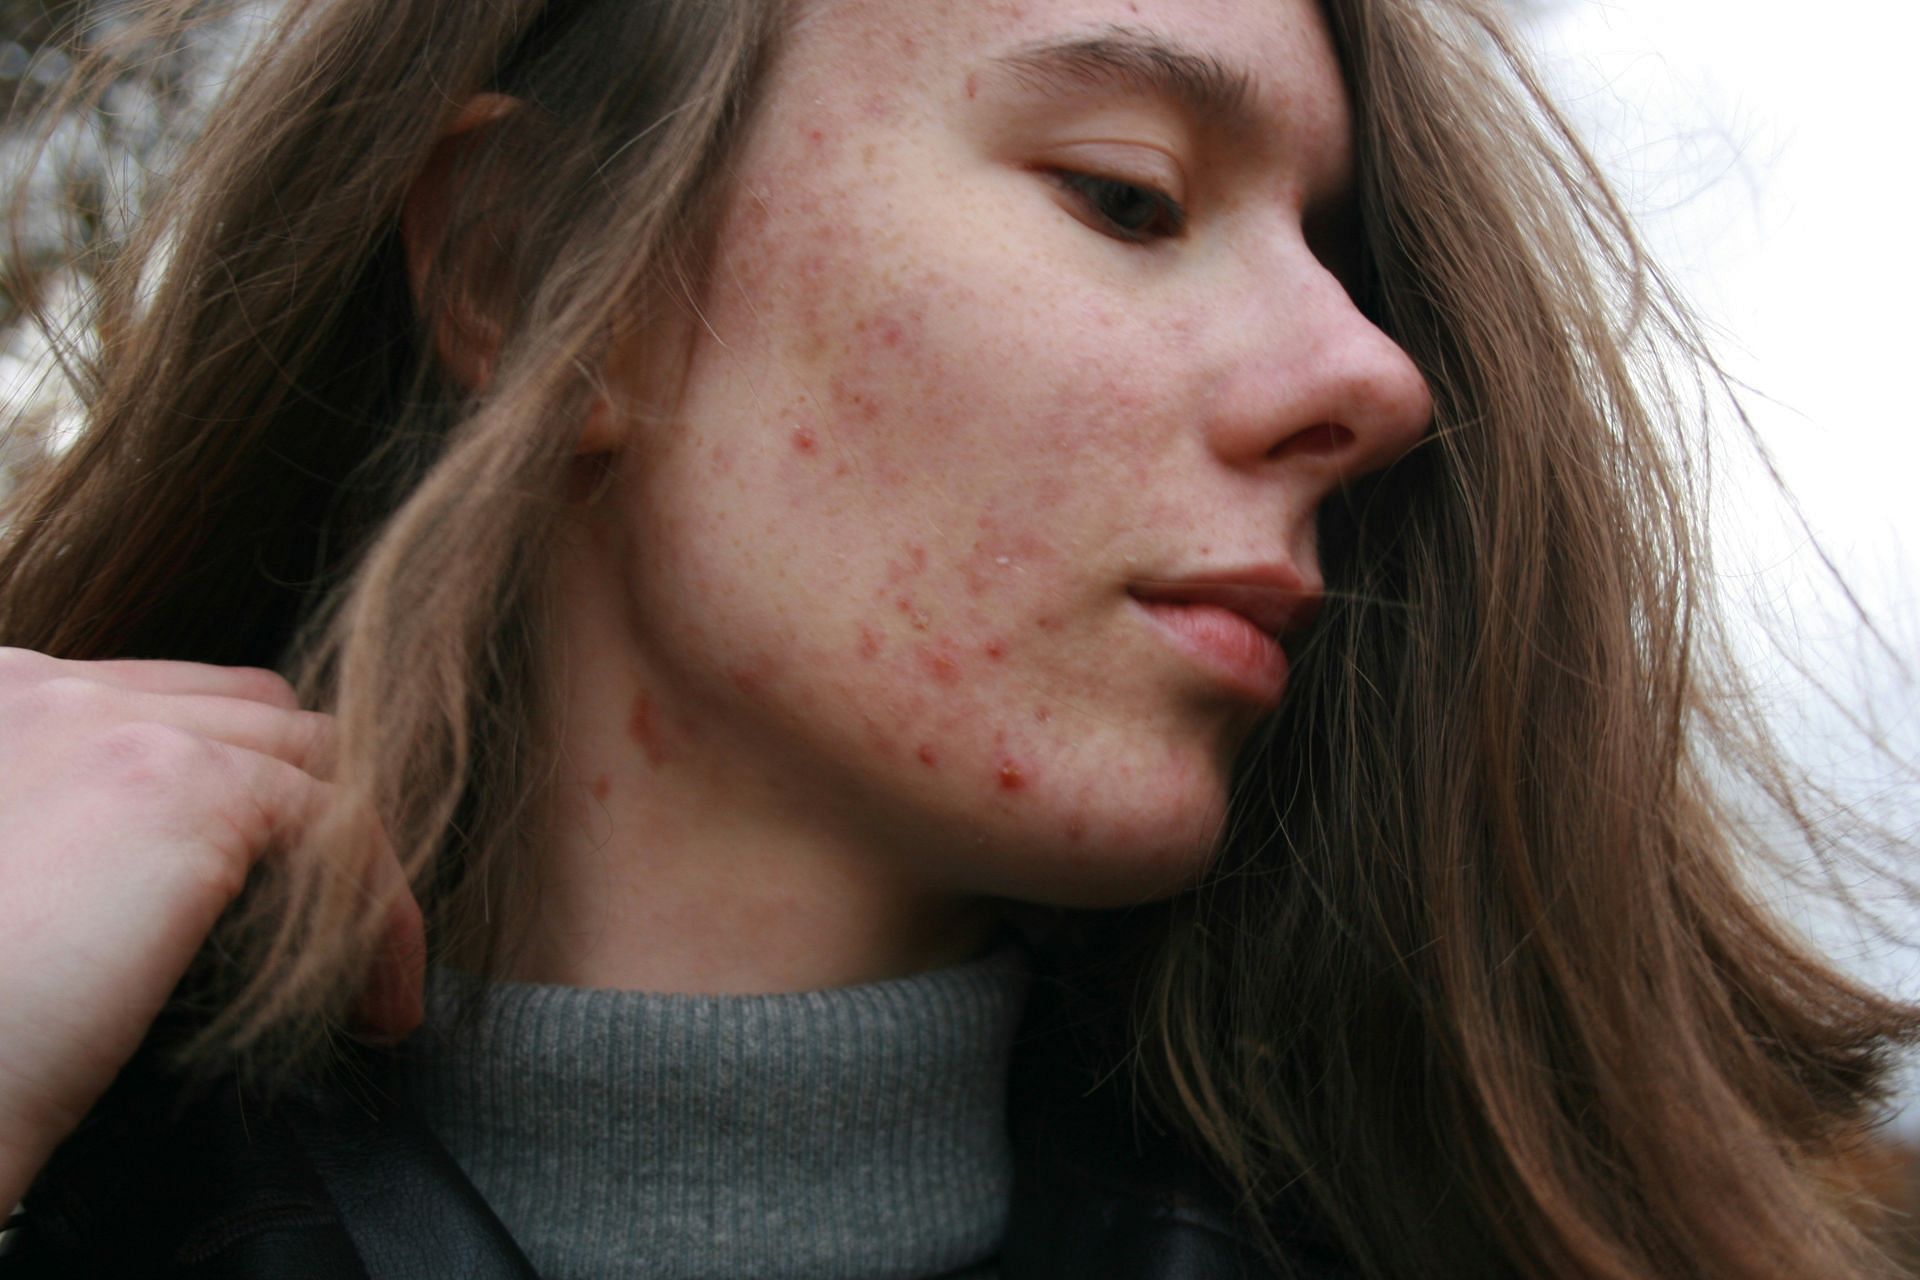 How is this condition different from acne? (Image by Barbara Krysztofiak/Unsplash)